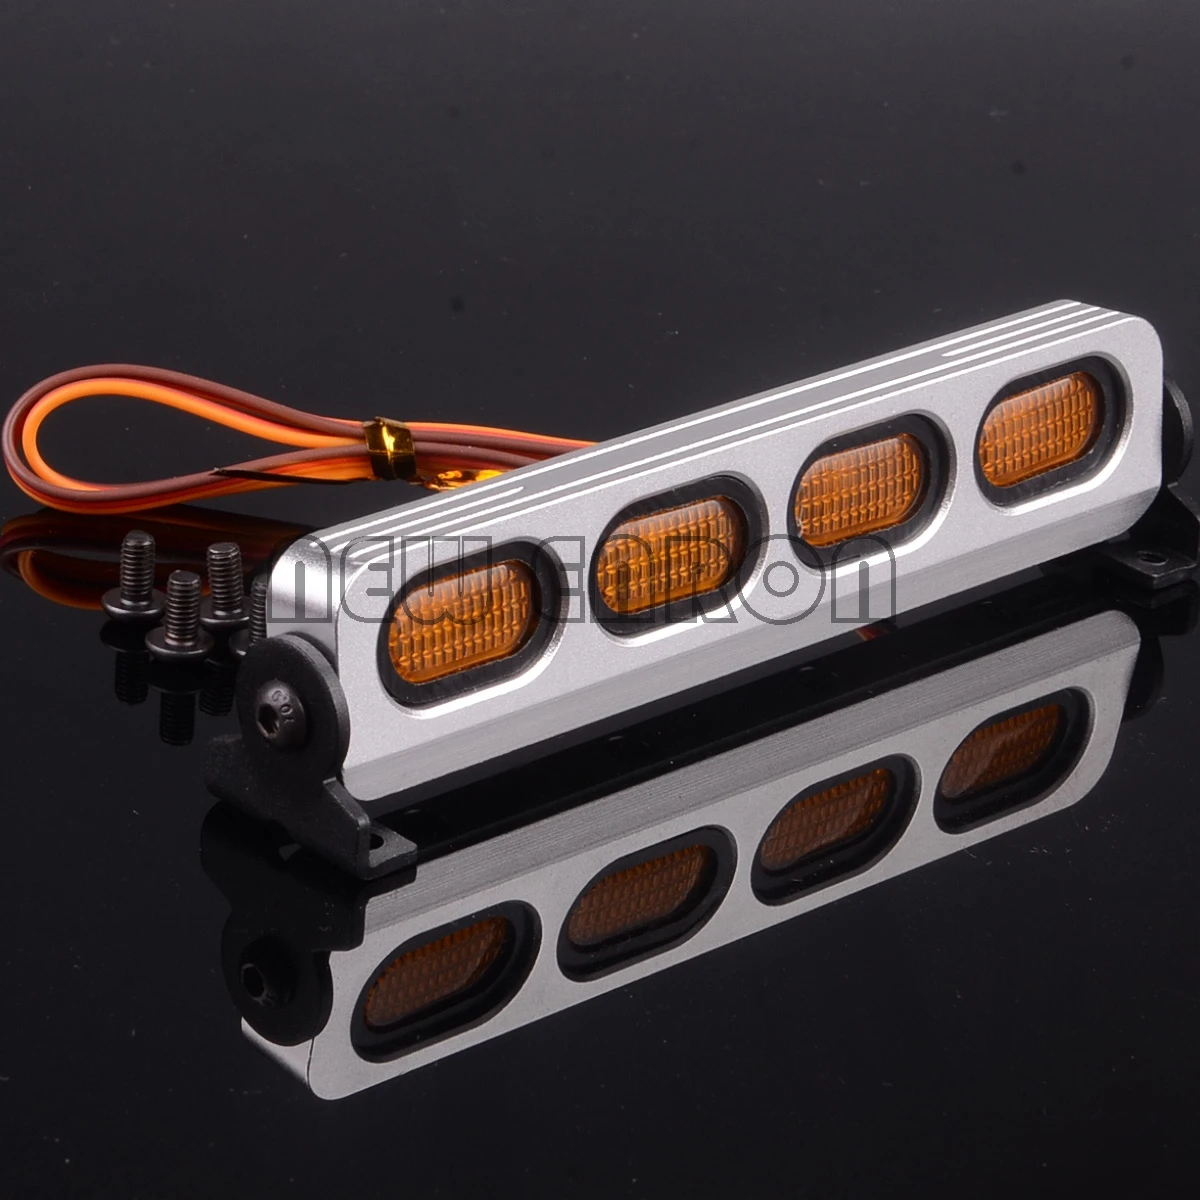 

1:10 1:8 Multi Function Ultra LED Light Bar 5 Modes RC 1/10 1/8 FOR D90 SXC10 4WD AX-508 NEW ENRON